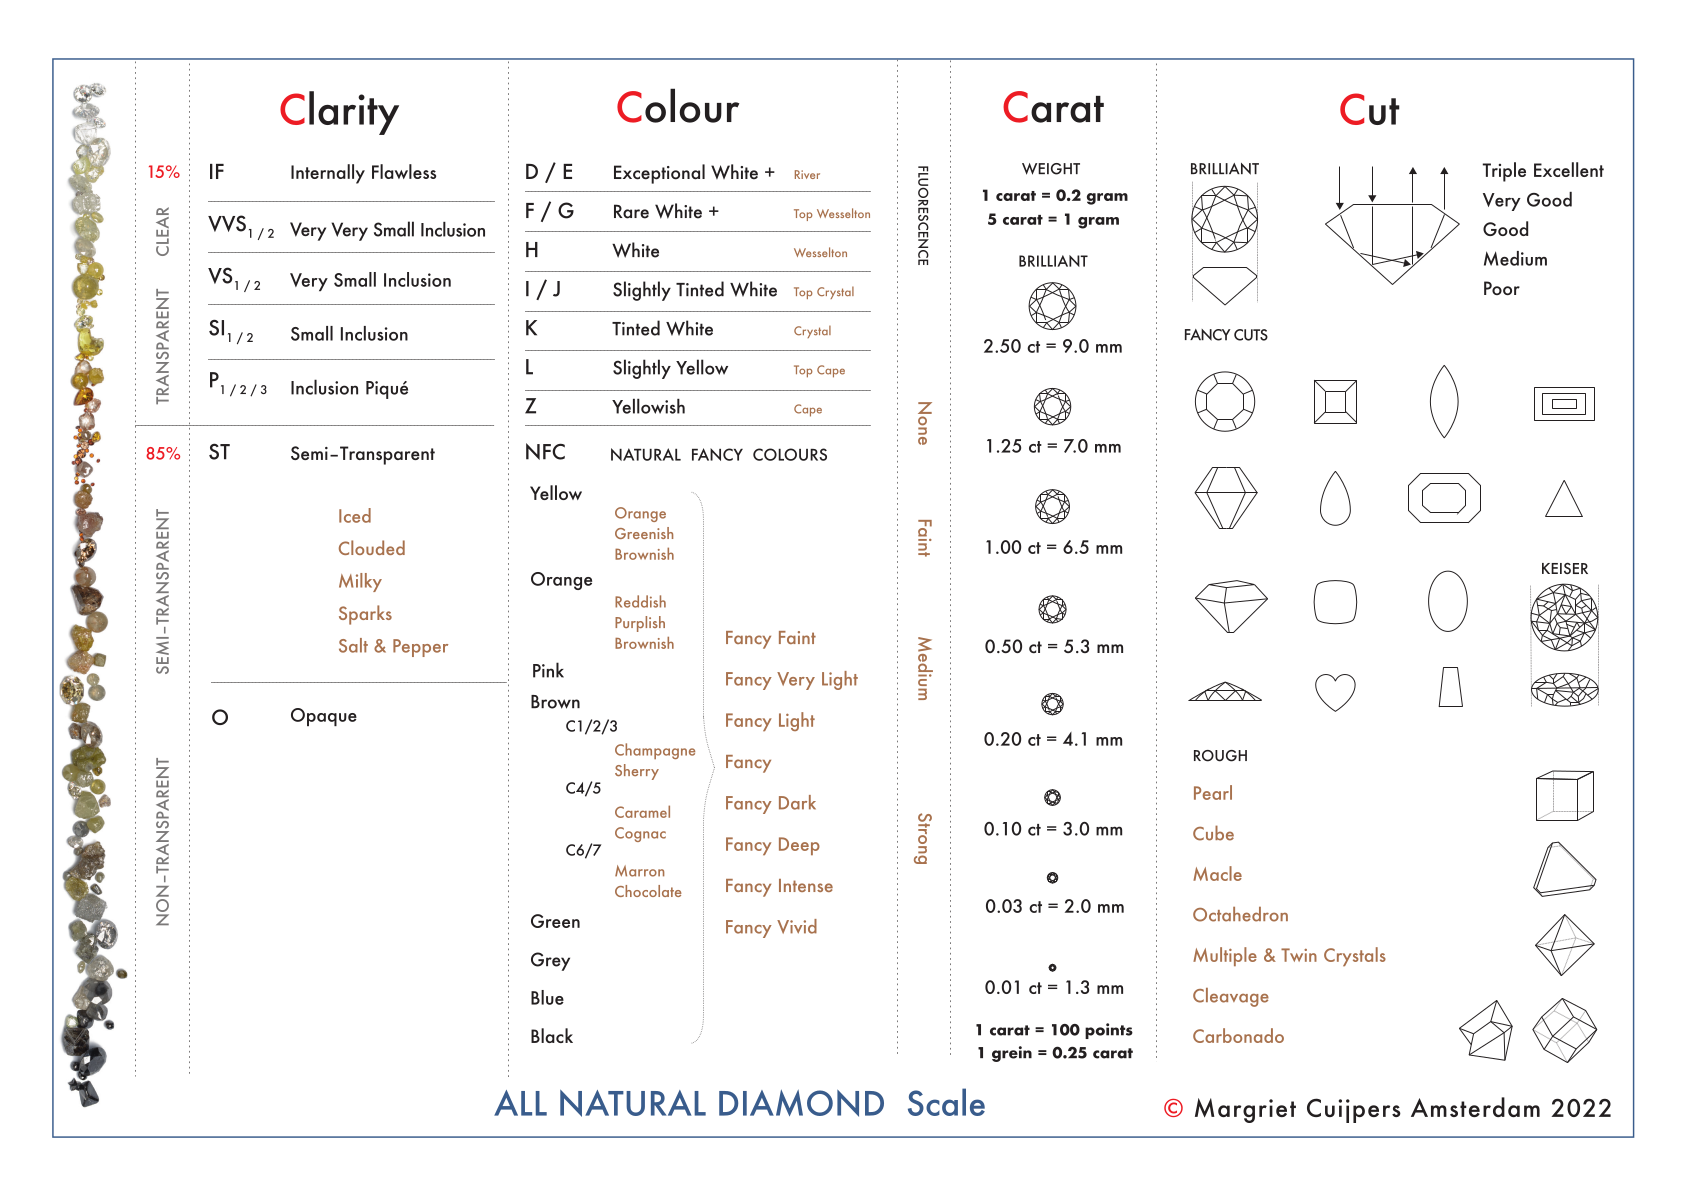 All Natuaral Diamond Scale by Margriet Cuijpers